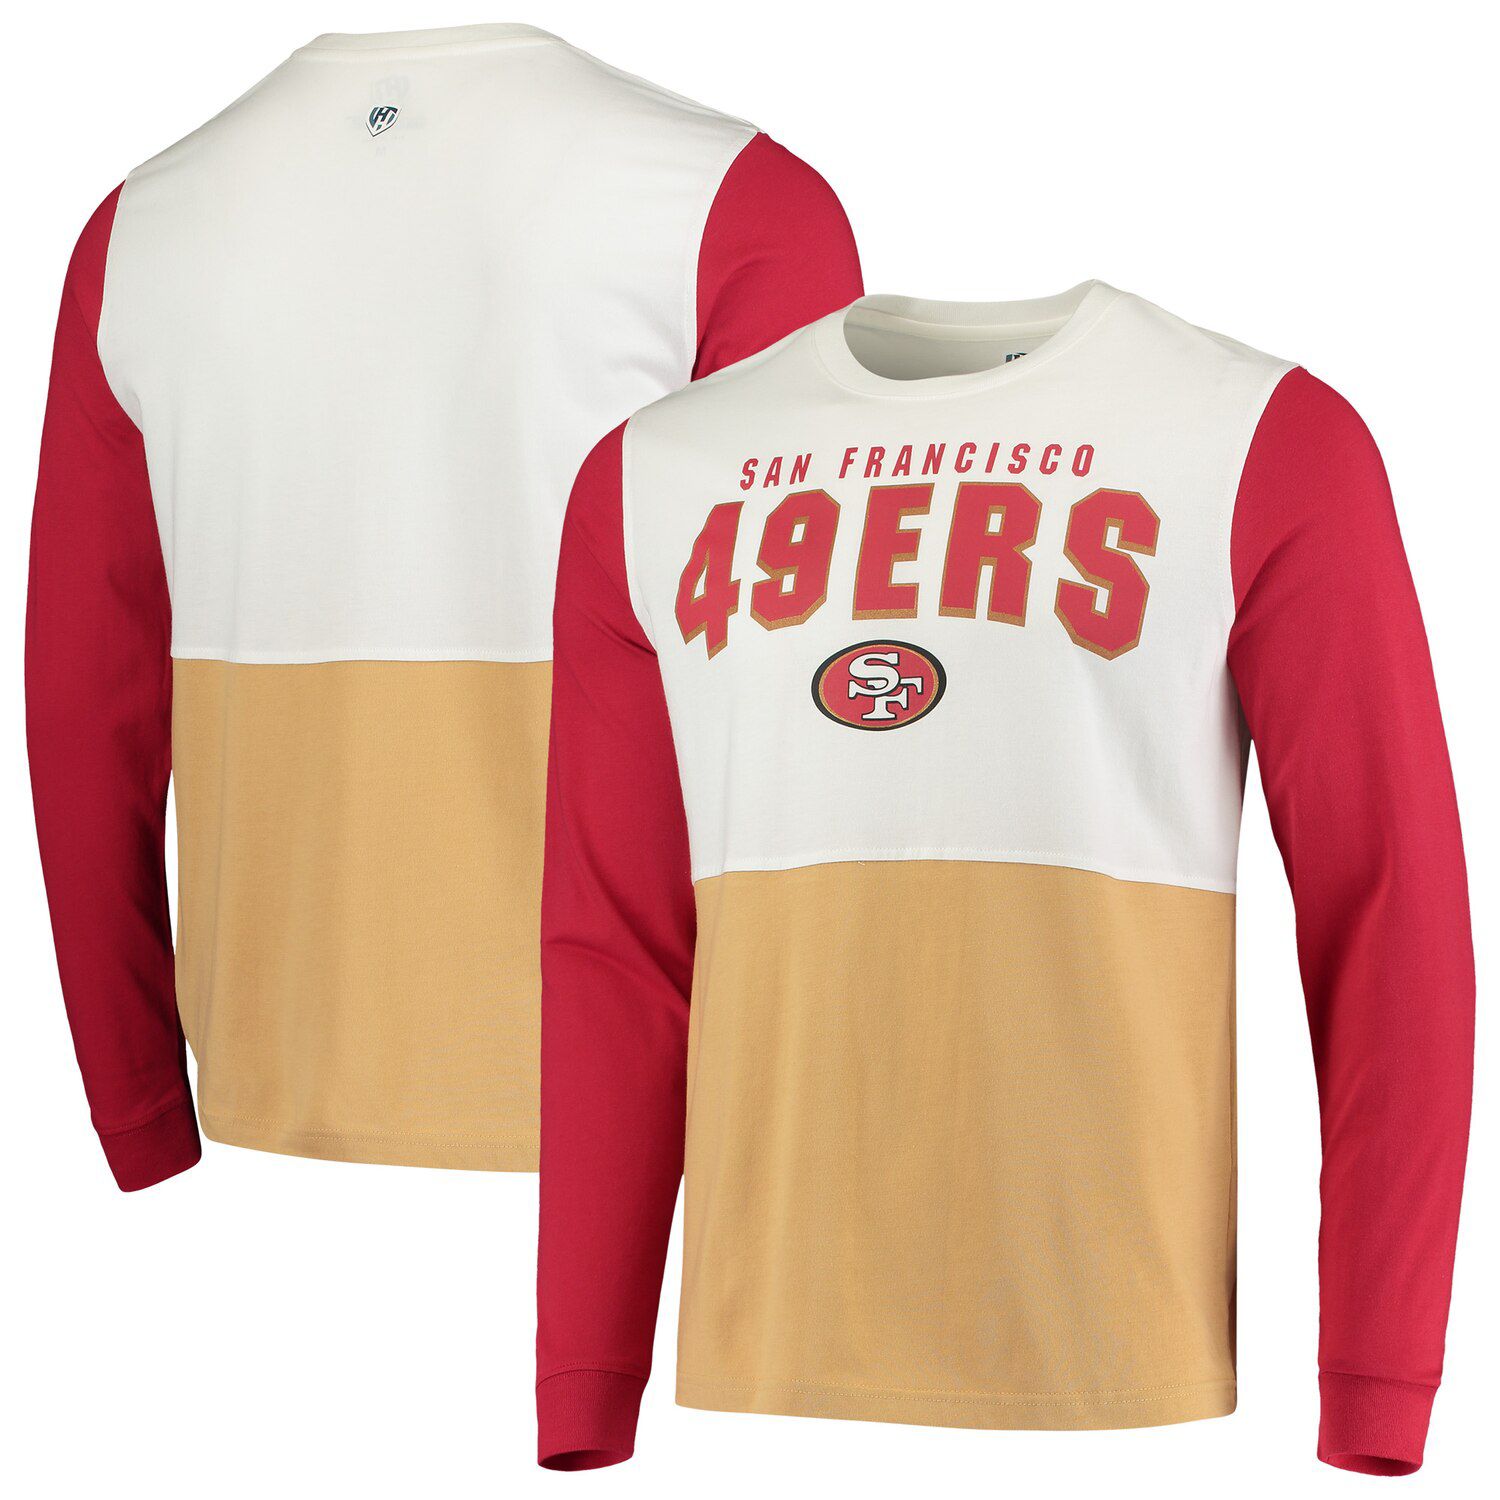 49ers white and gold jersey